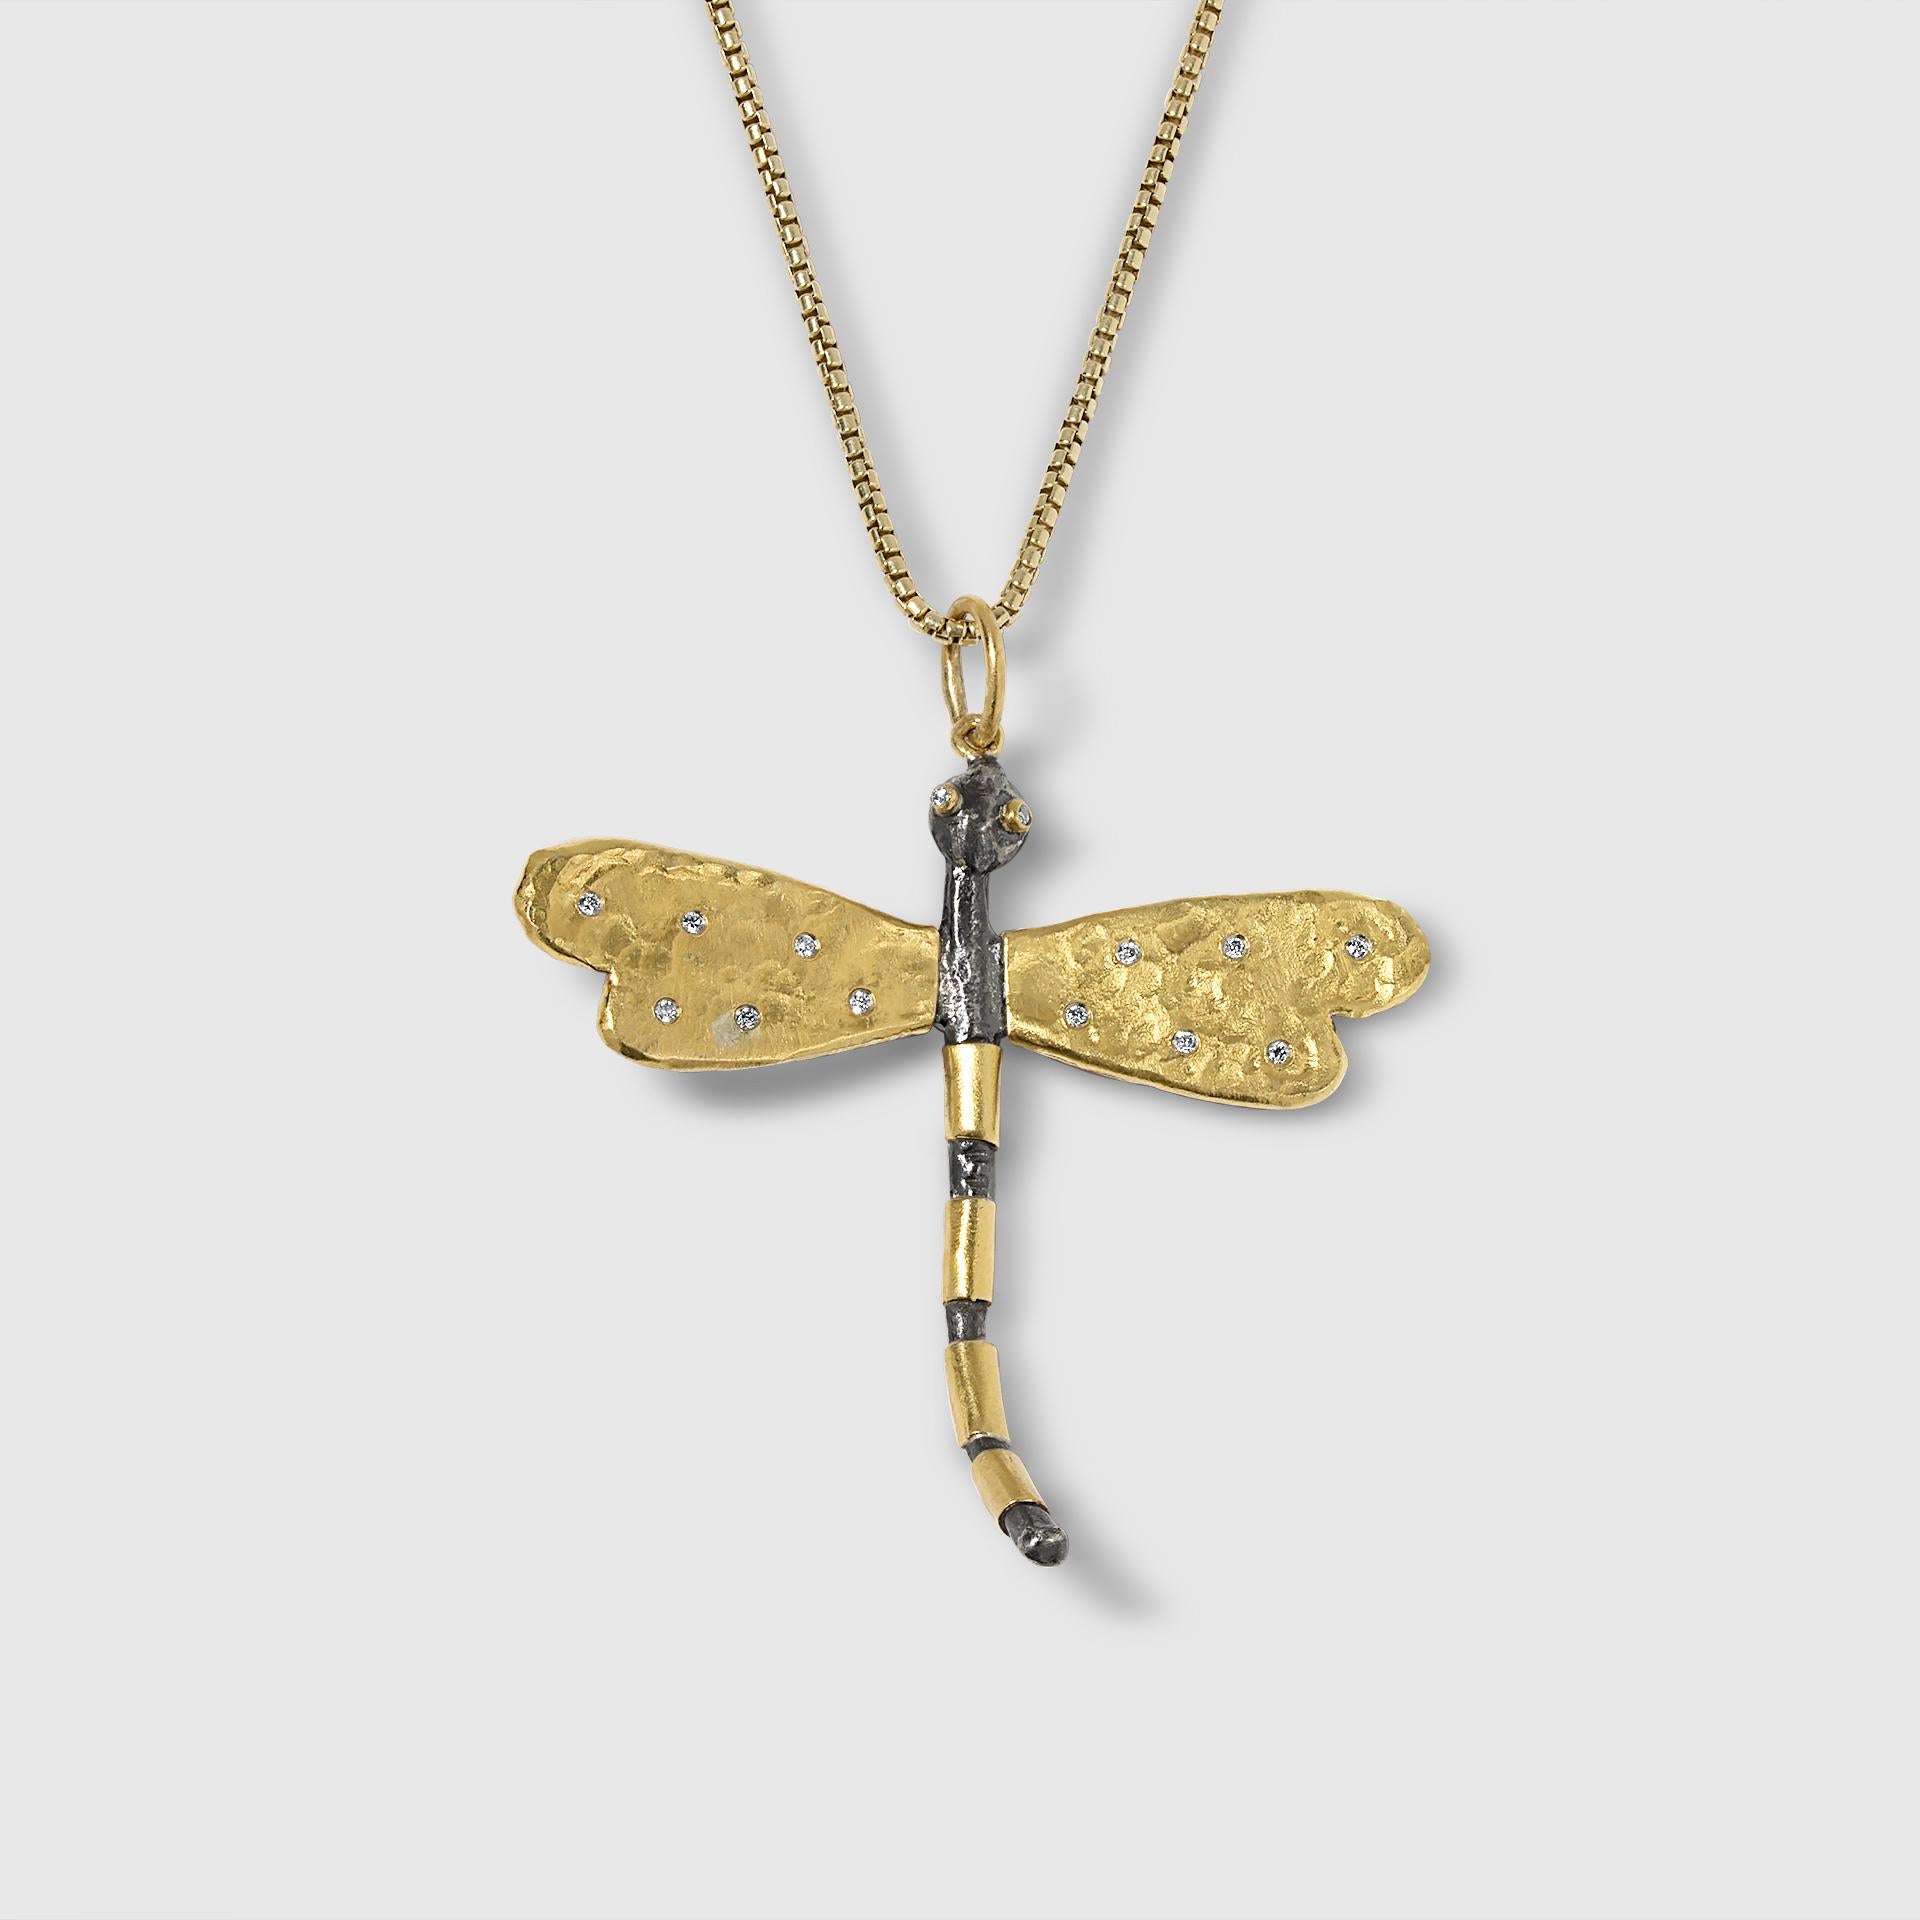 Artisan Large, Dragonfly Charm Pendant Necklace with Diamonds, 24kt Gold and Silver For Sale